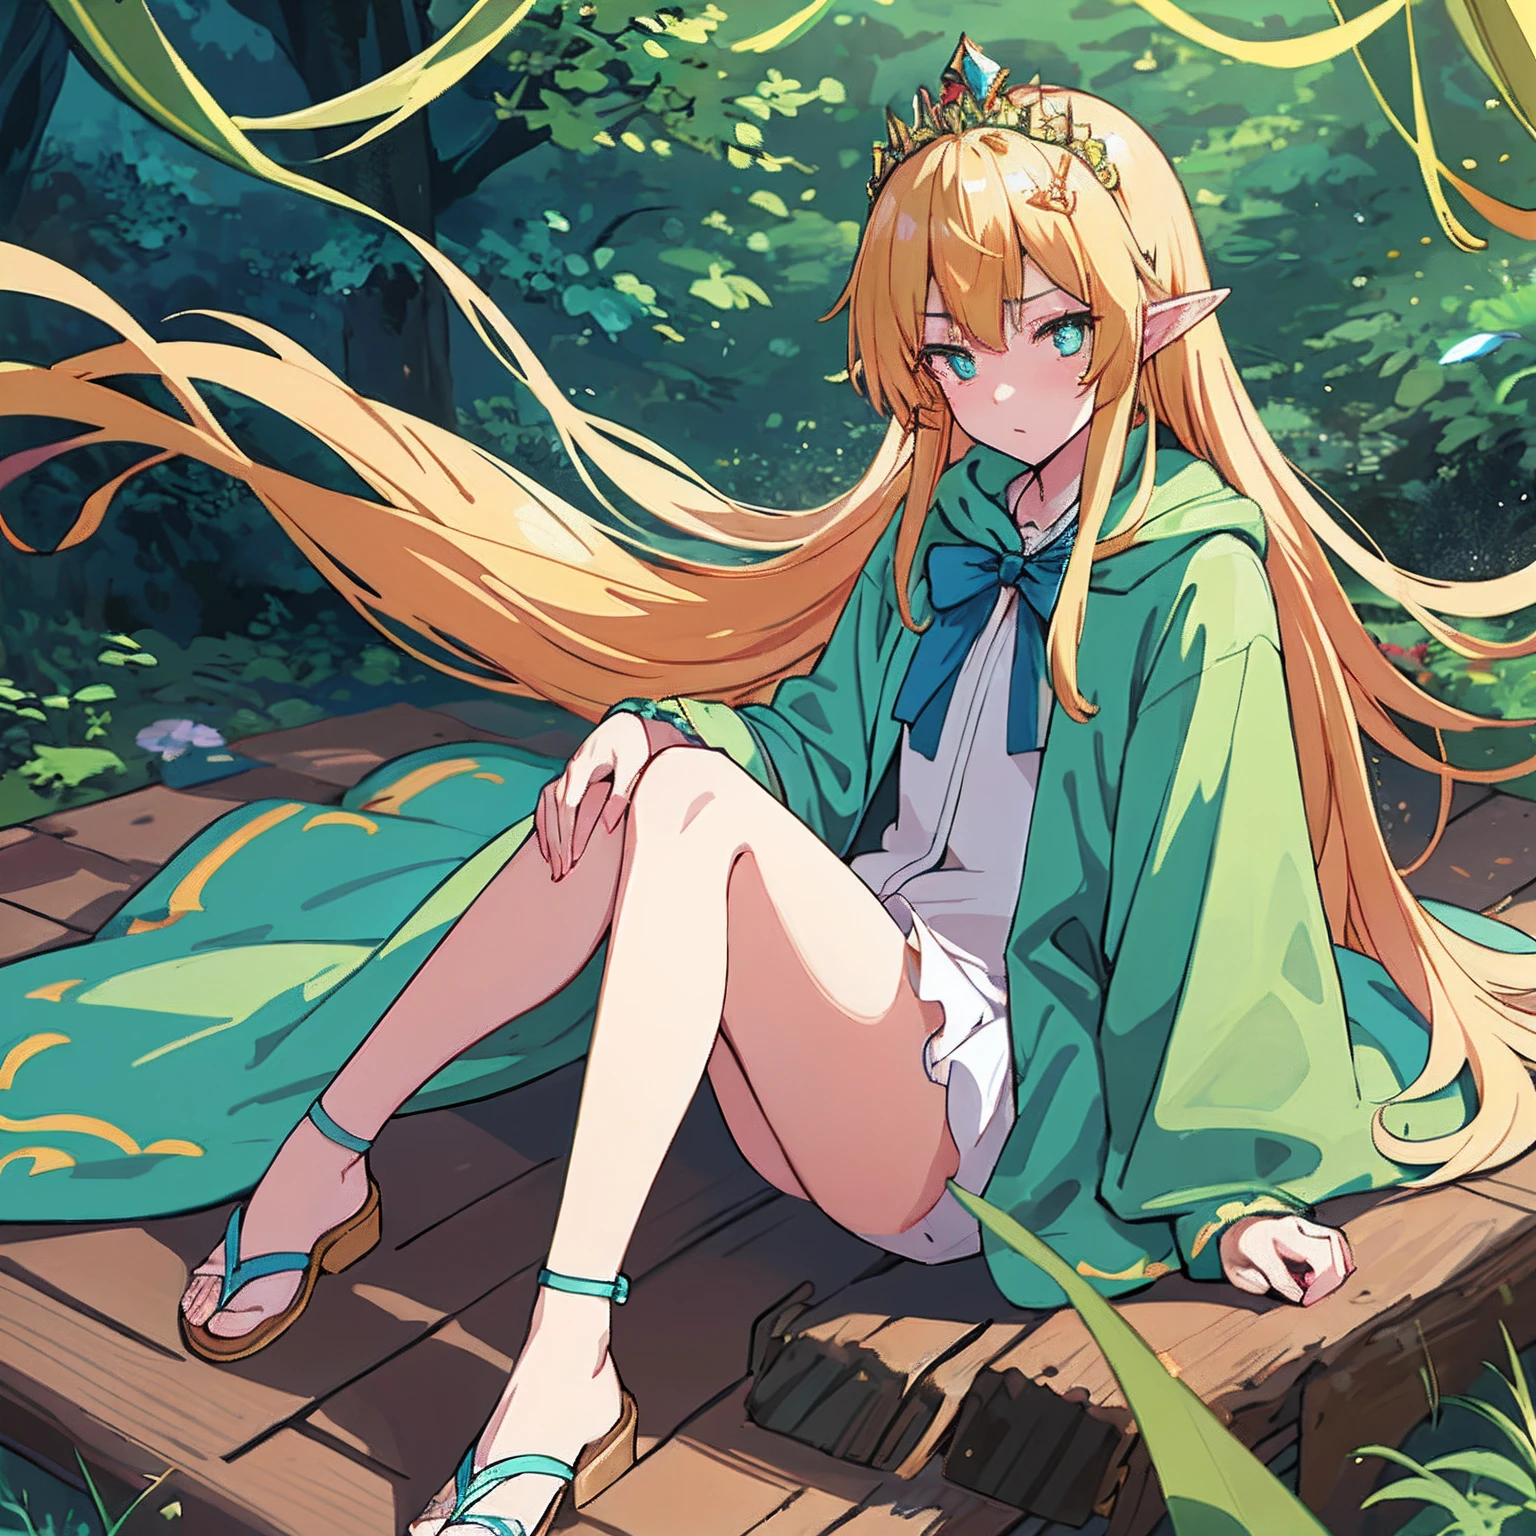 hiquality, tmasterpiece (One Elven Princess) High. long ears, blonde woman, a small crown on the head, Cyan eyes, Sullen face. Green hunting cloak, Sandals. in front of a forest background.